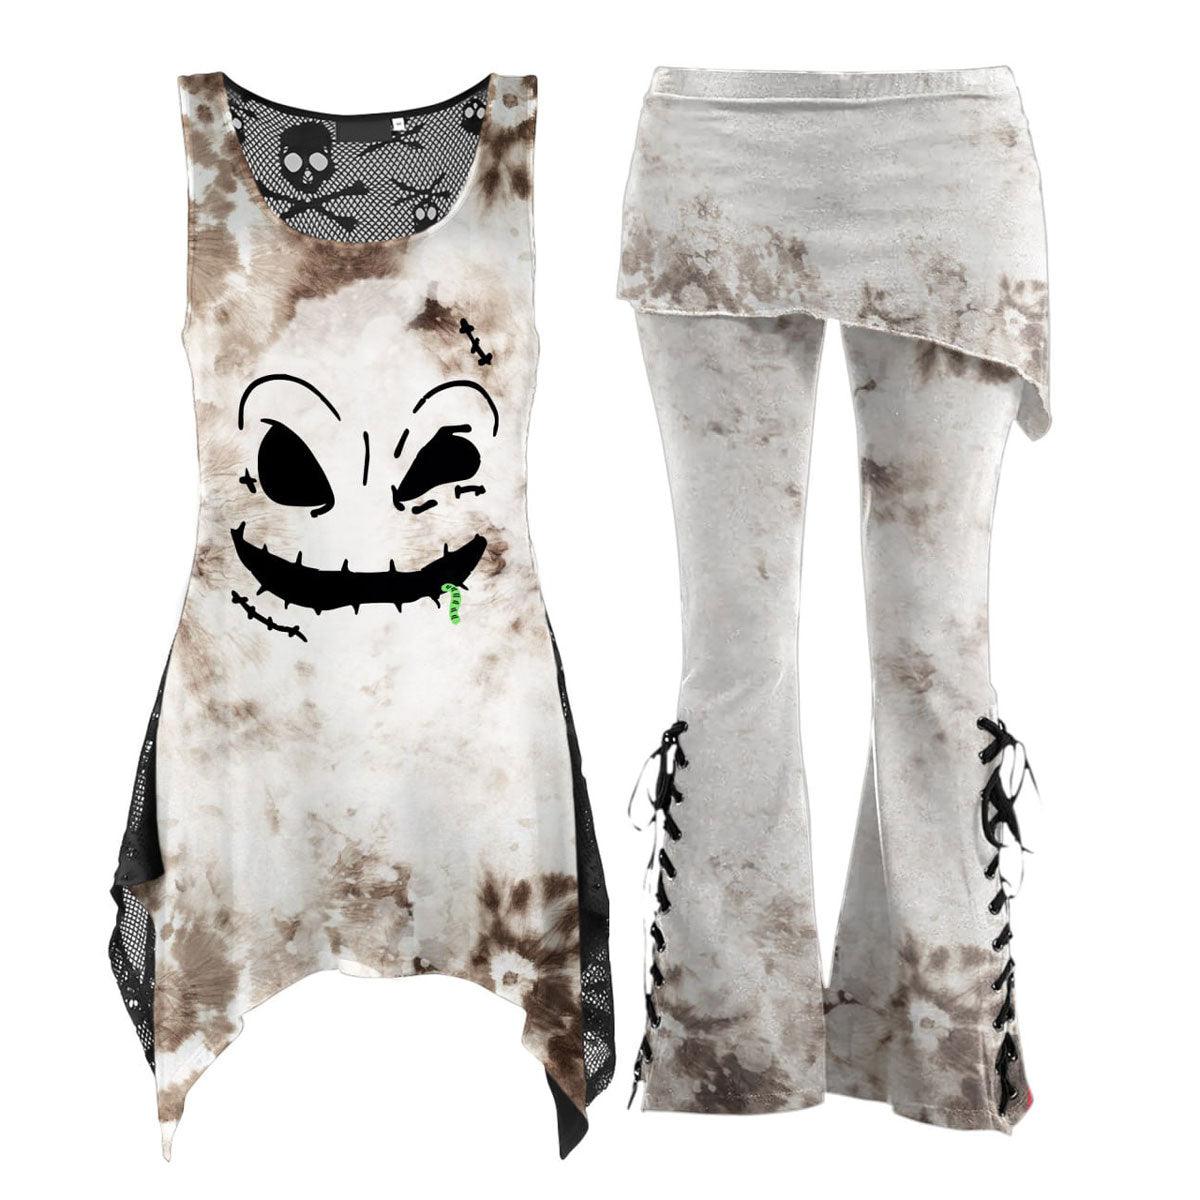 Oogie Boogie Cosplay Costume, Gothic Style Tank Top And Pant Set